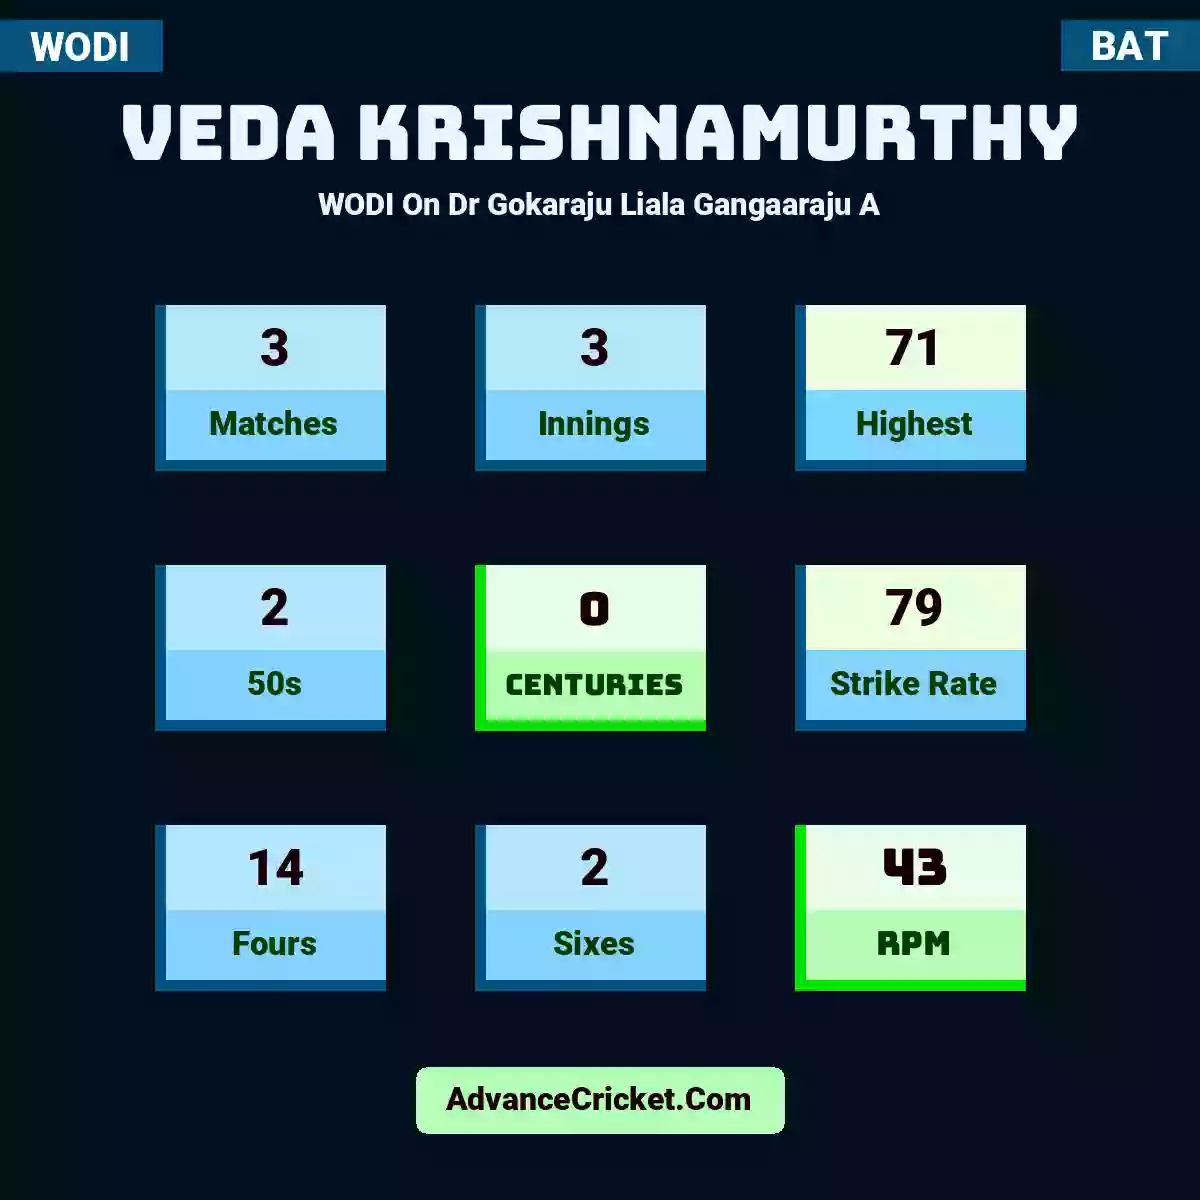 Veda Krishnamurthy WODI  On Dr Gokaraju Liala Gangaaraju A, Veda Krishnamurthy played 3 matches, scored 71 runs as highest, 2 half-centuries, and 0 centuries, with a strike rate of 79. V.Krishnamurthy hit 14 fours and 2 sixes, with an RPM of 43.